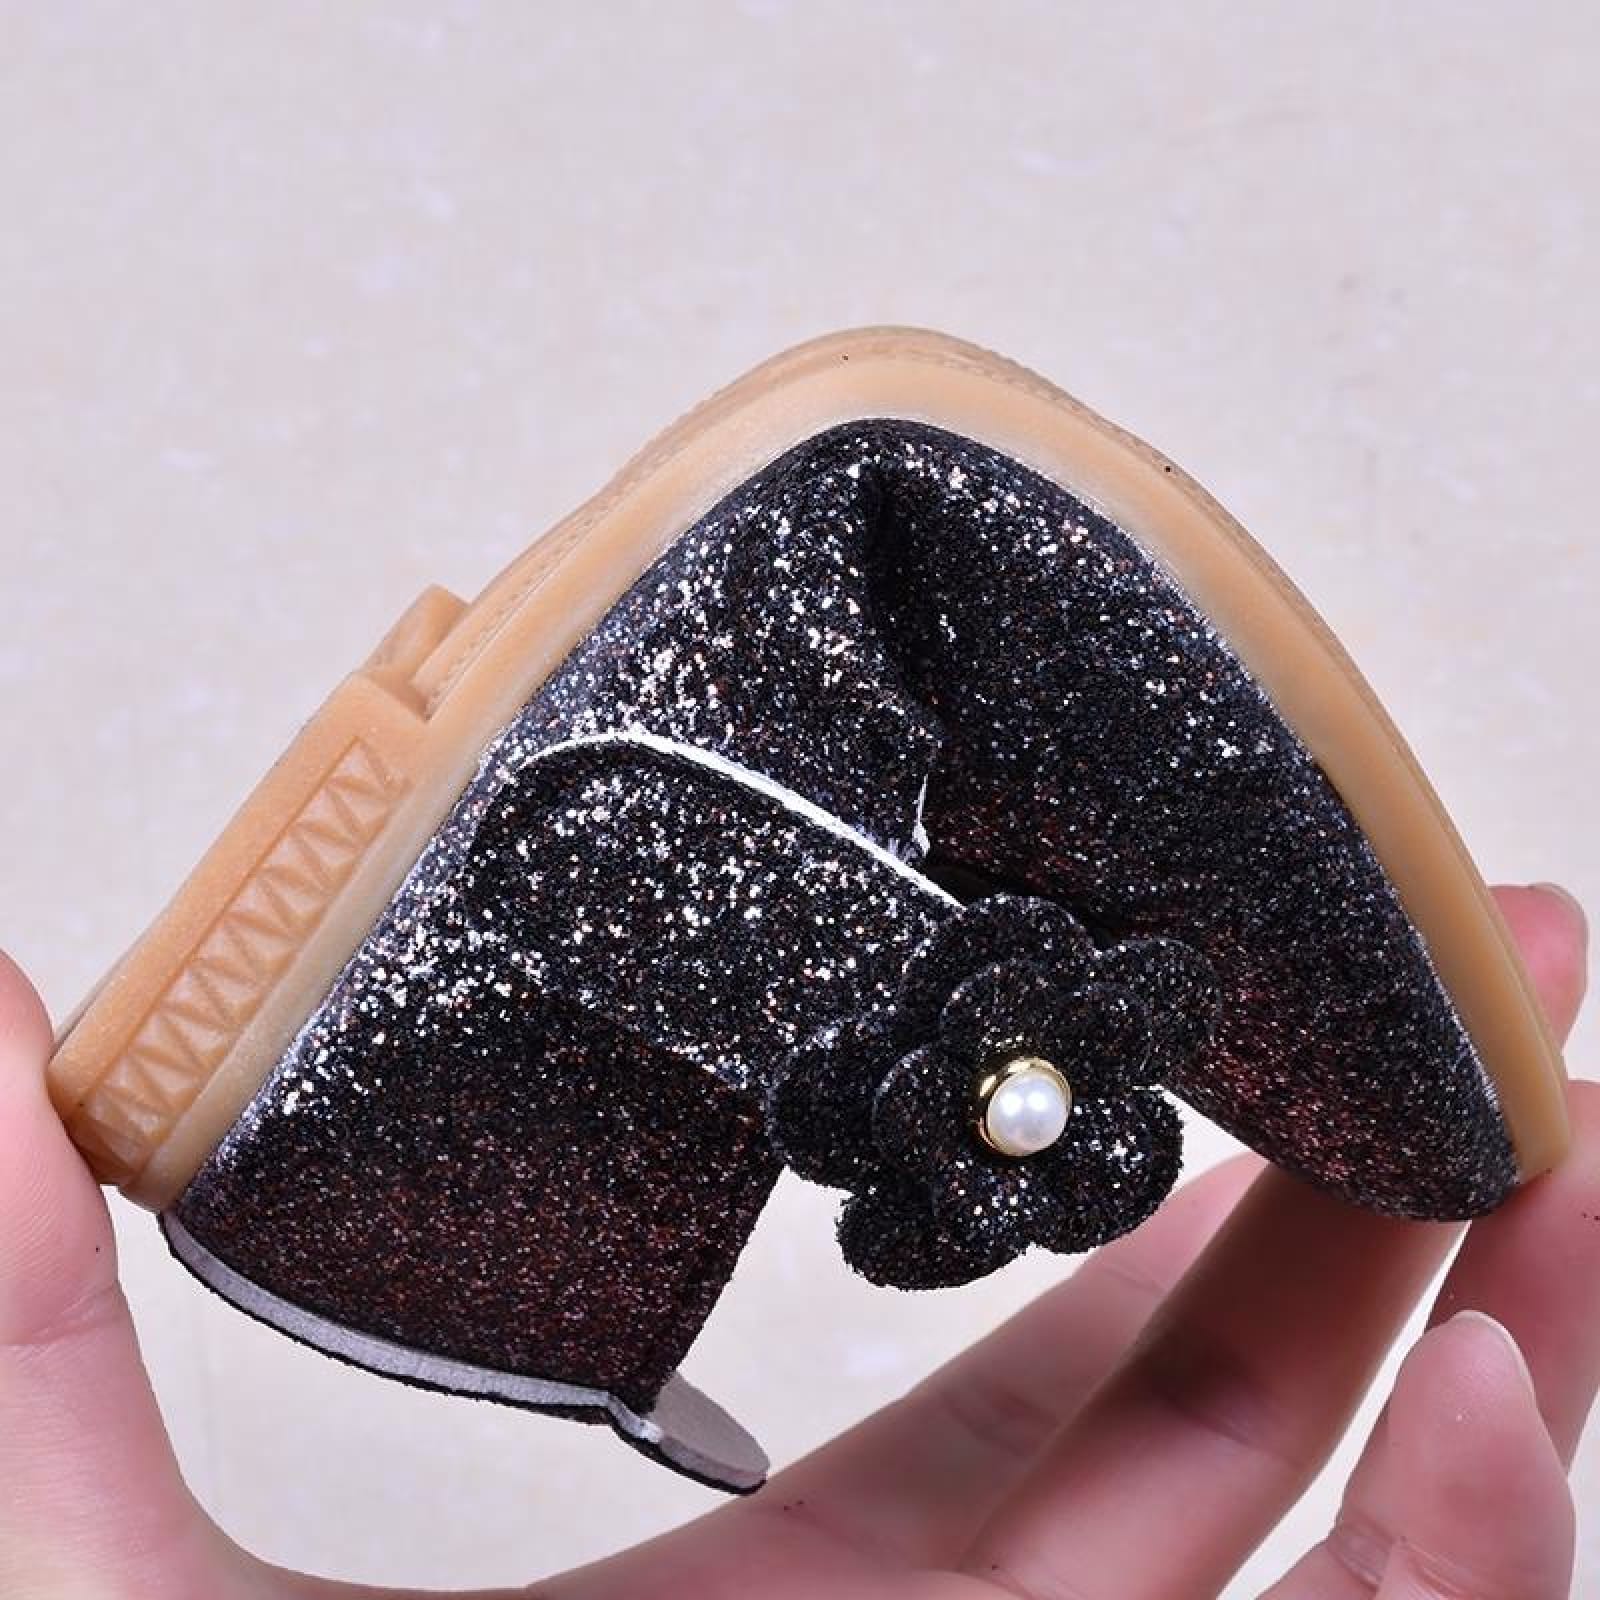 Black / Green / Lavender Leather Sequin Pearl Flat Princess Shoes Wedding Flower Girl Shoes